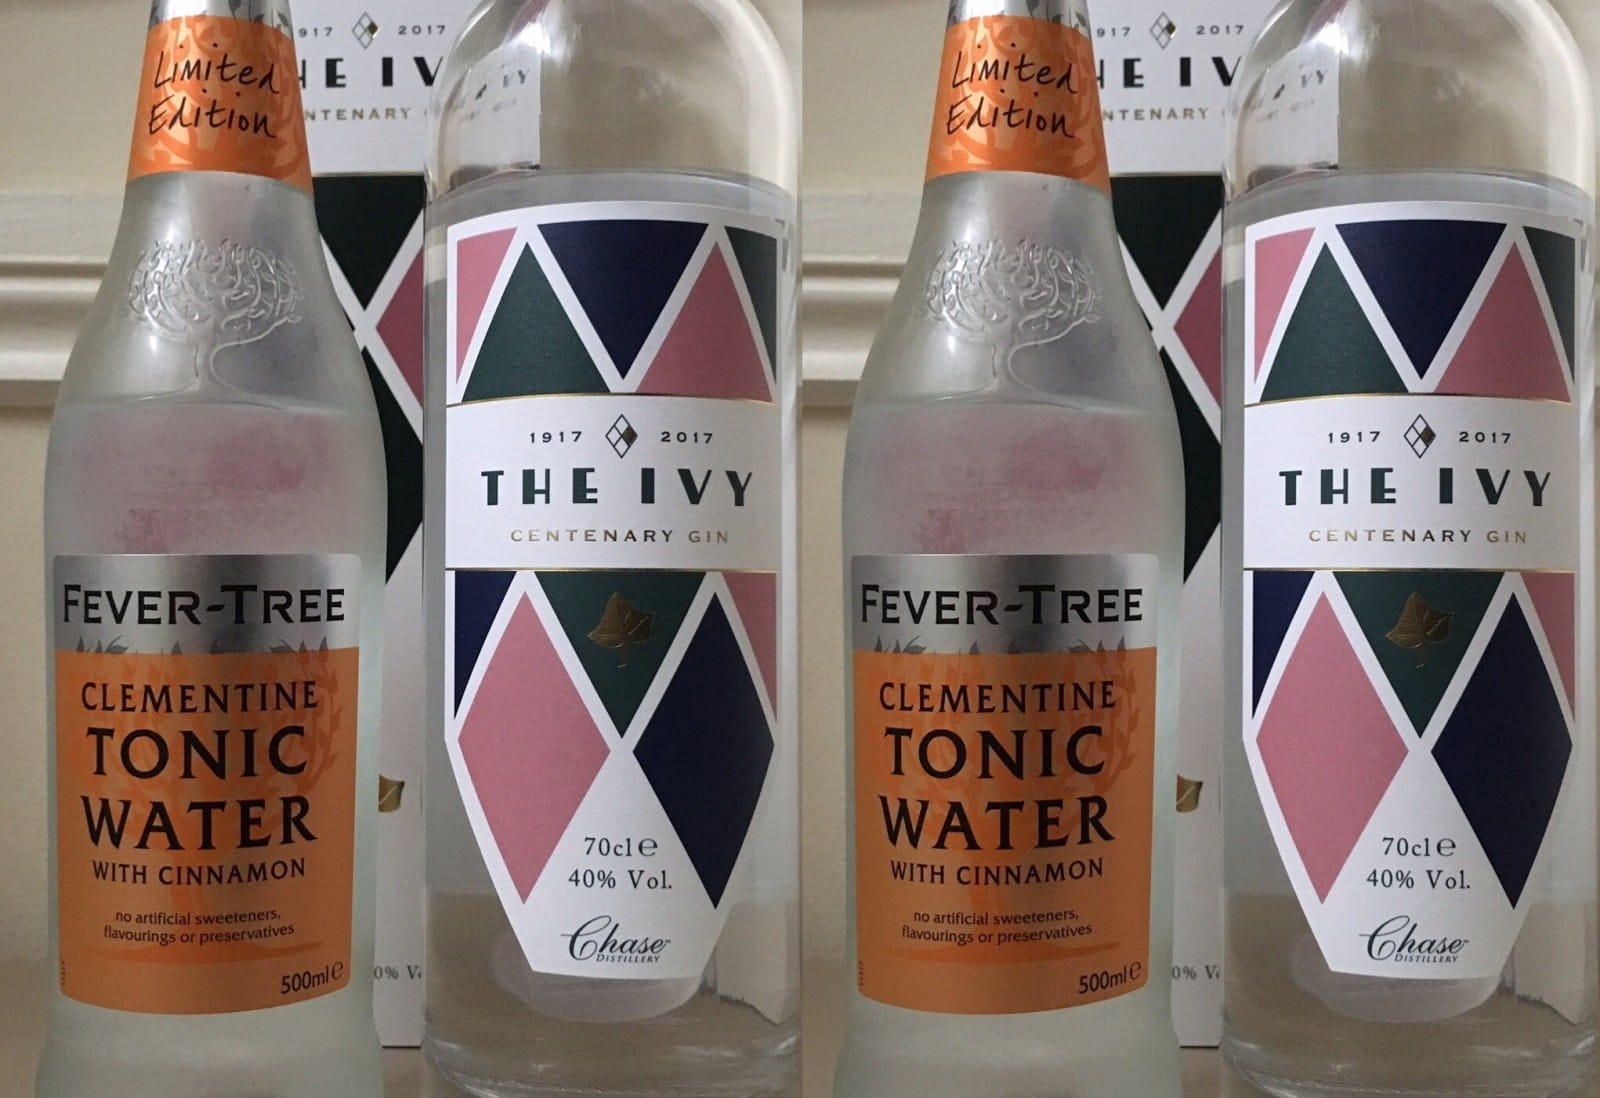  The Ivy Gin and Fevertree clementine tonic